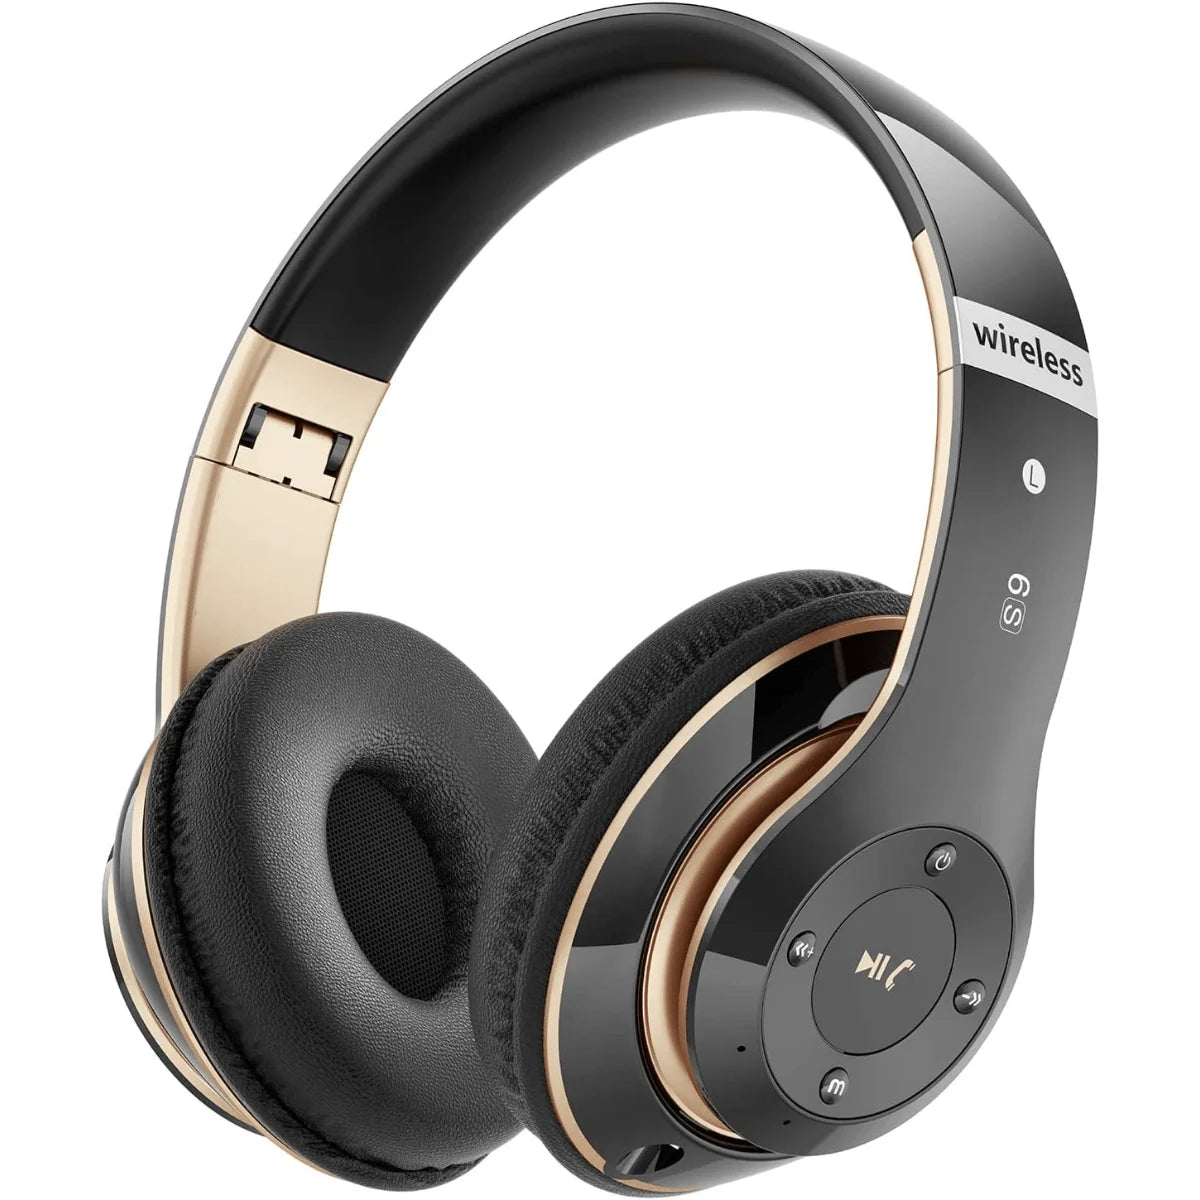 HiFi Stereo Bluetooth Headphones with Noise Cancellation and Mic